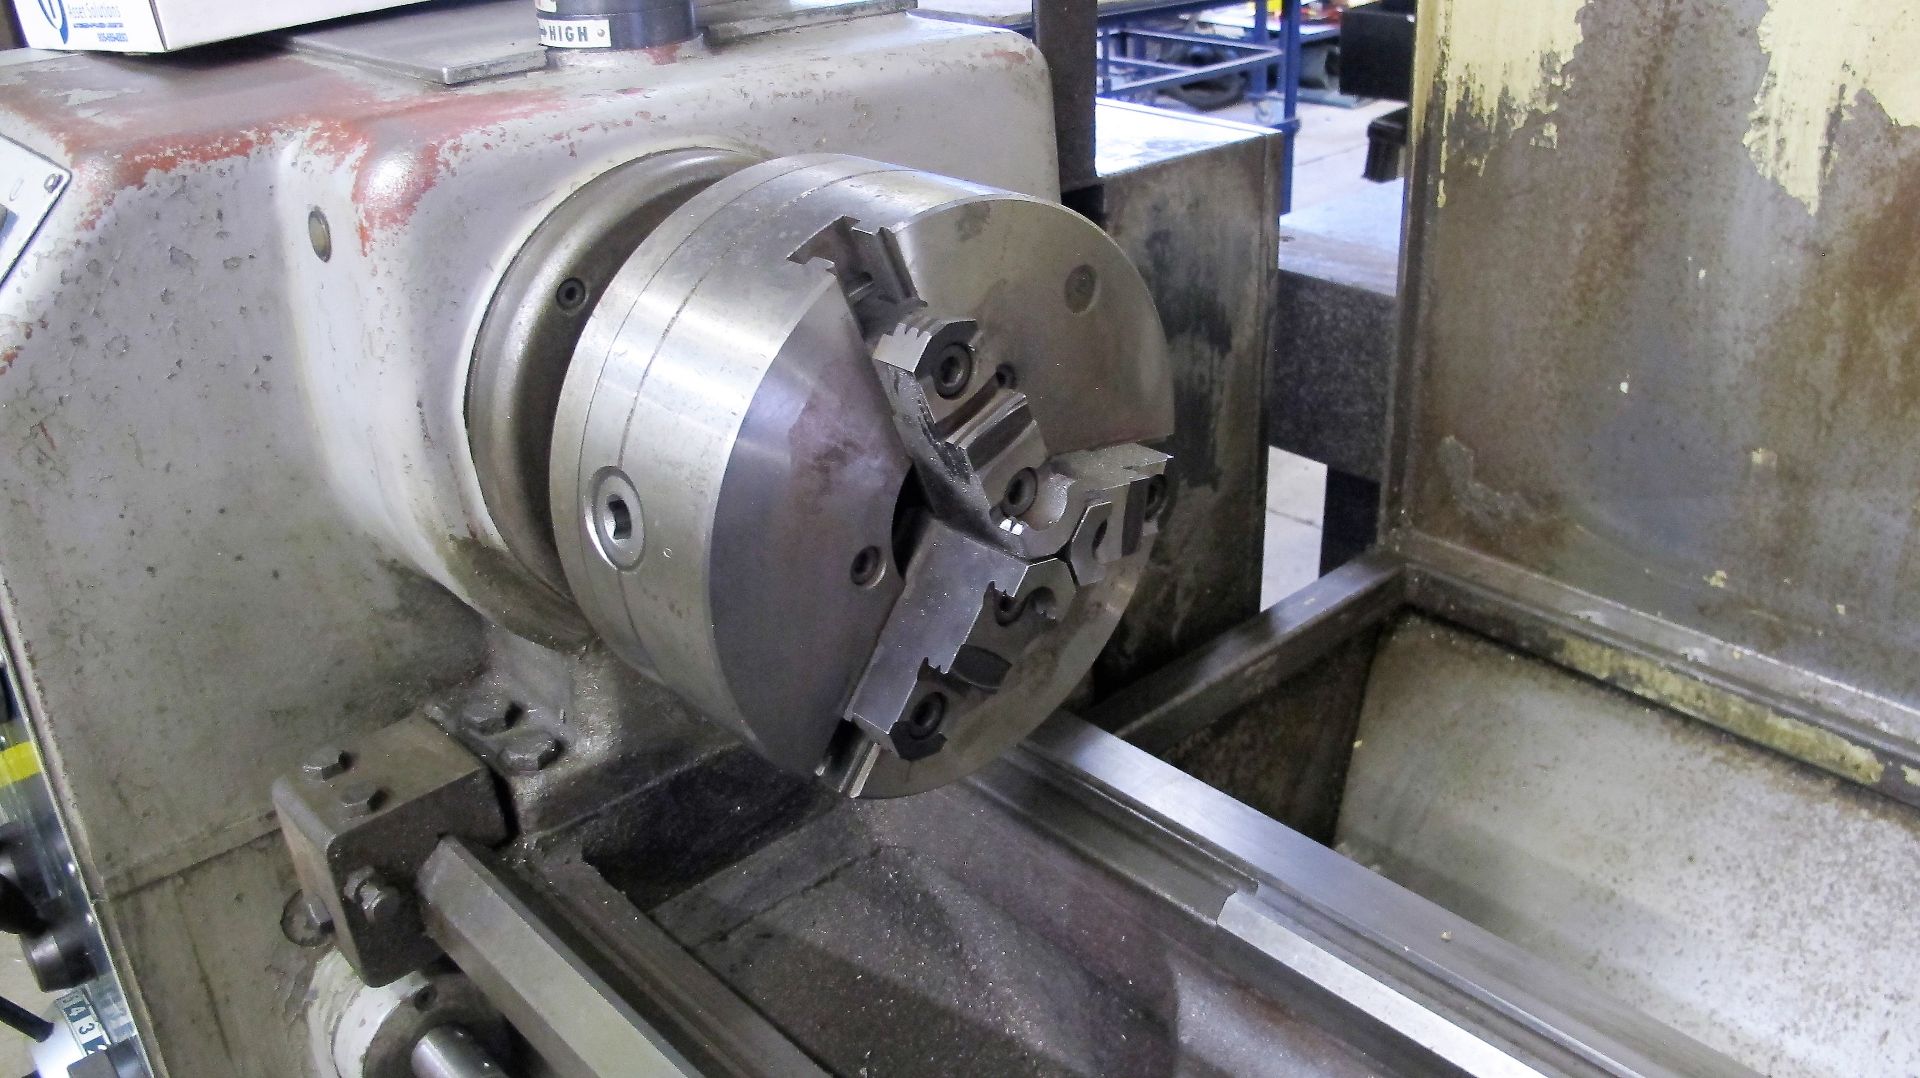 HOWA SANGYO 1000 ENGINE LATHE, S/N 10409, 9" 3-JAW CHUCK, 20" SWING, 54" BED, TAILSTOCK, TOOL - Image 4 of 9